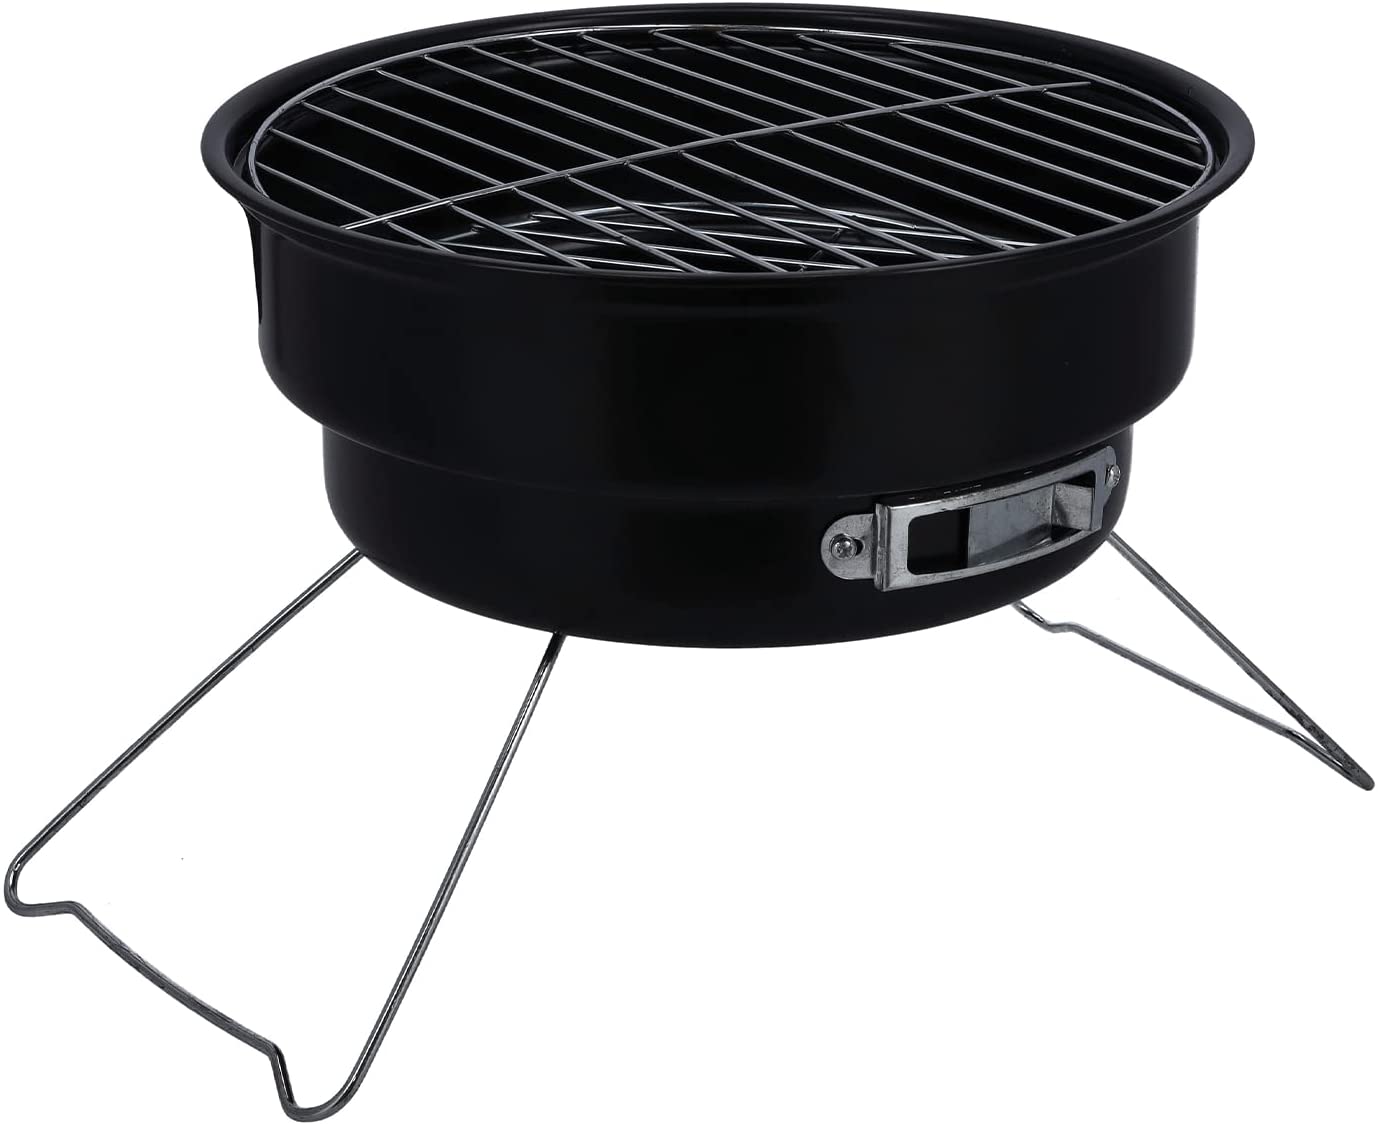 Round black charcoal barbecue with stainless steel legs.